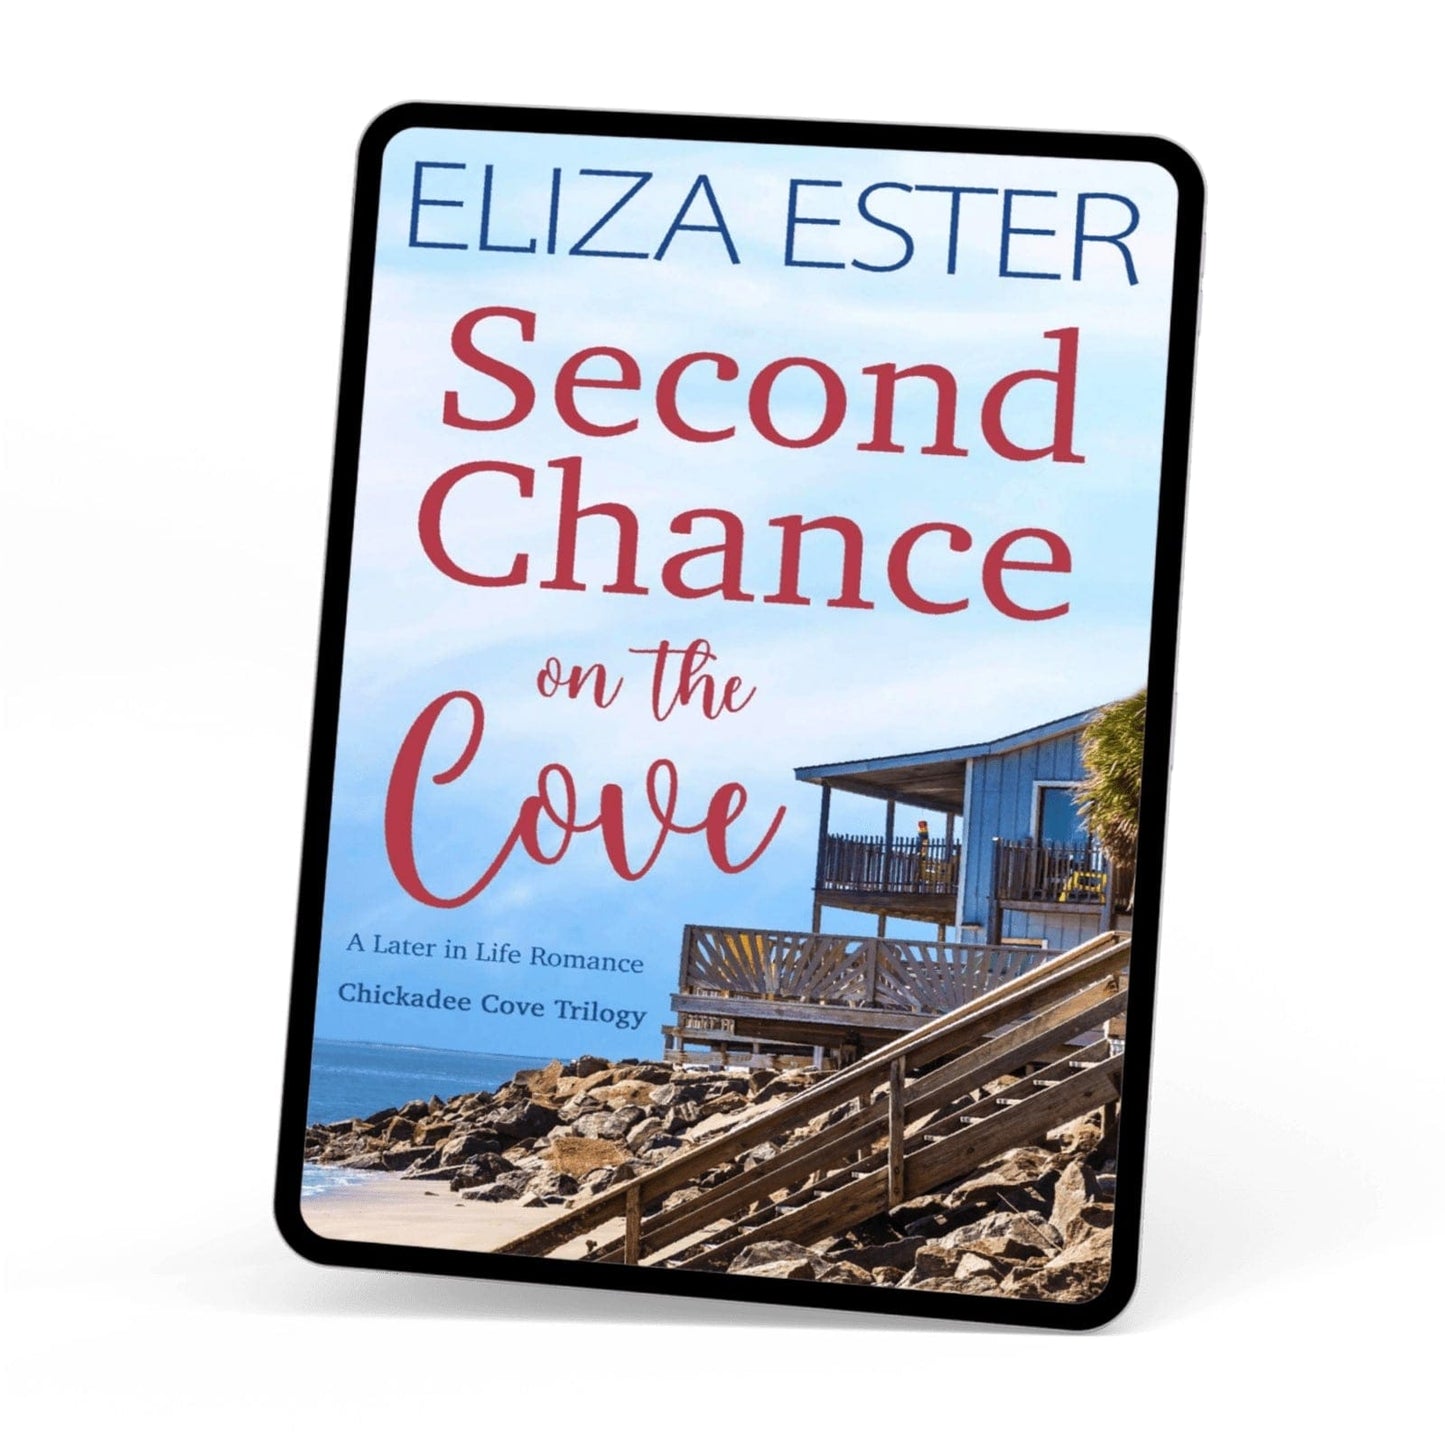 Eliza Ester Sweet Romance Second Chance on the Cove (EBOOK)